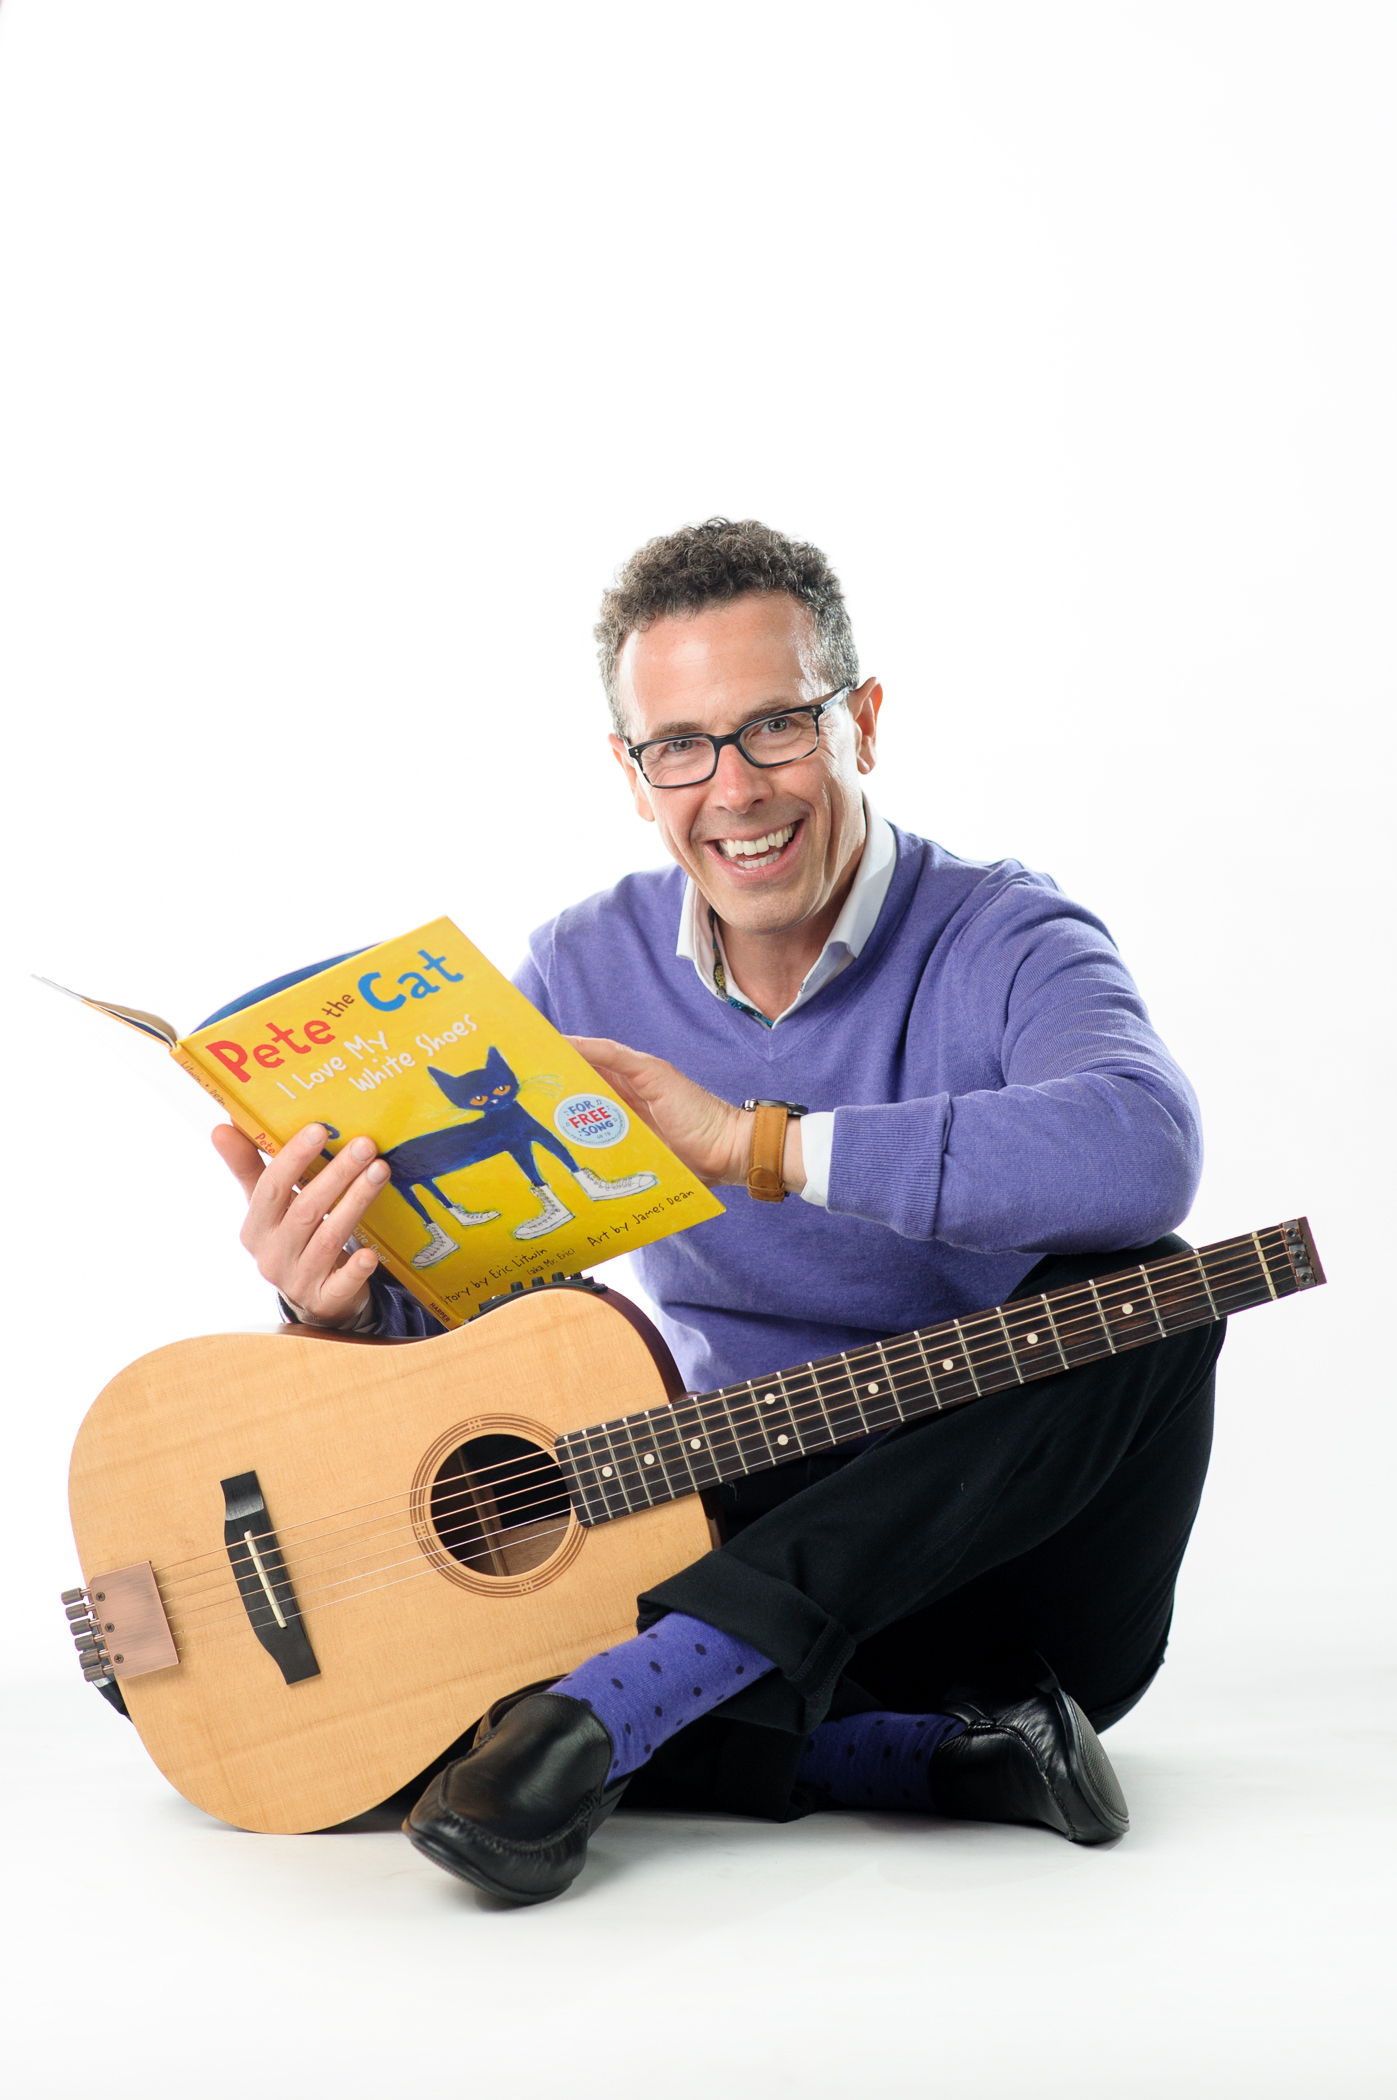 Image for “Because It’s All Good!” A Concert with Eric Litwin